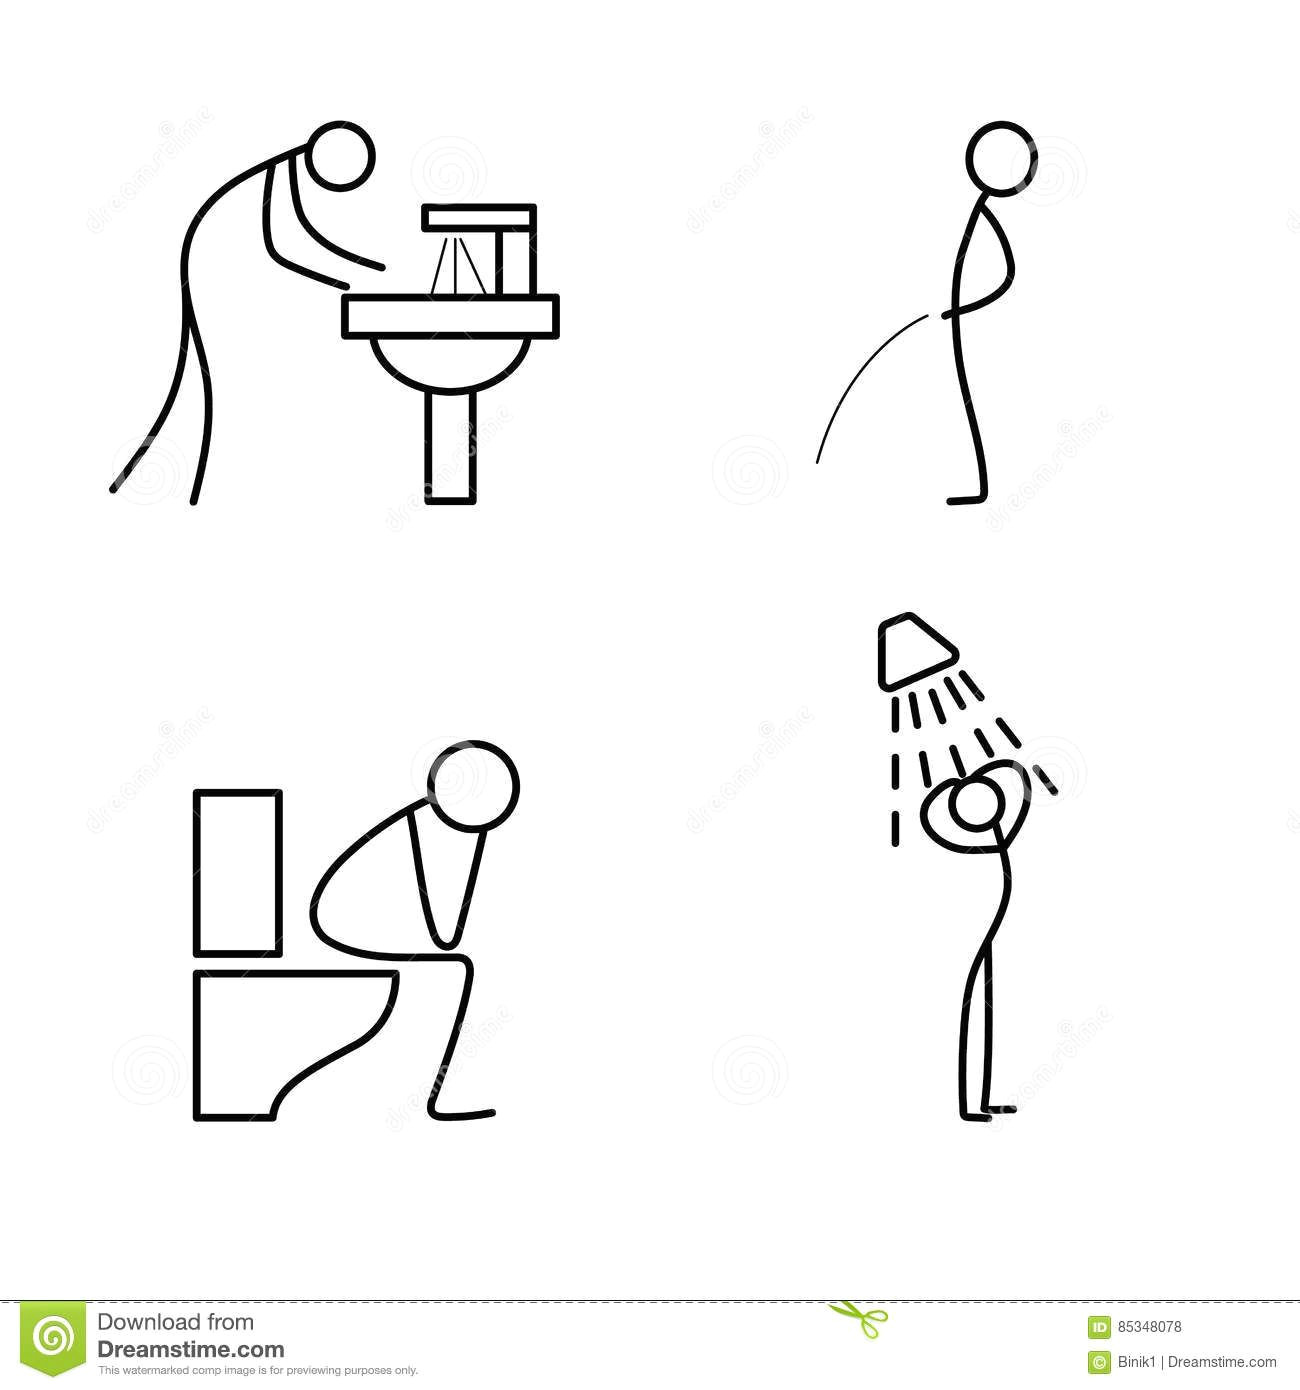 Drawing Of Hands Up Cartoon Icon Of Sketch Stick Figure Doing Life Routine Download